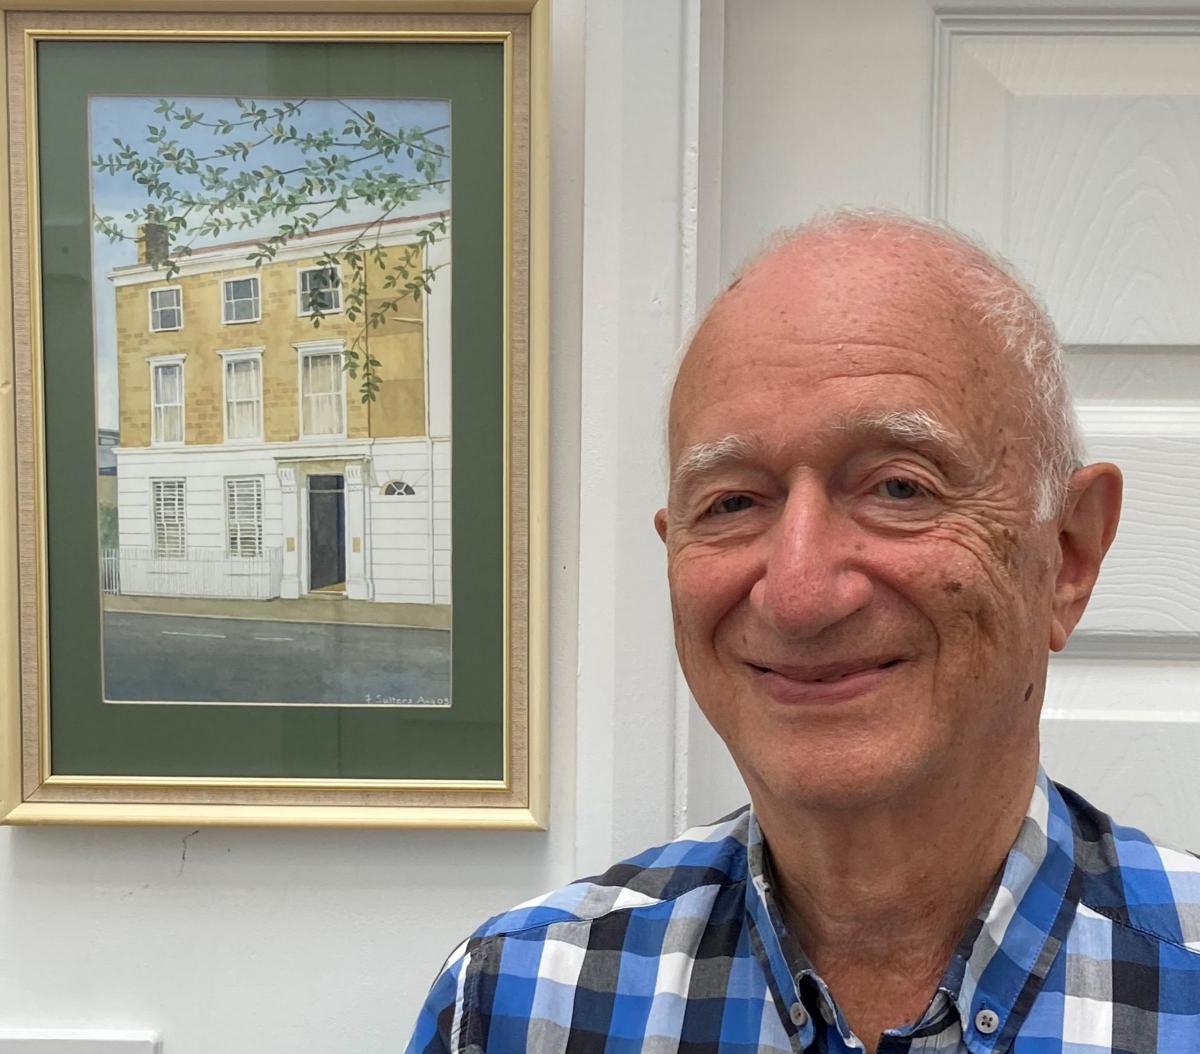 Isle of Wight dentist downs his drill after 60 years of treating patients